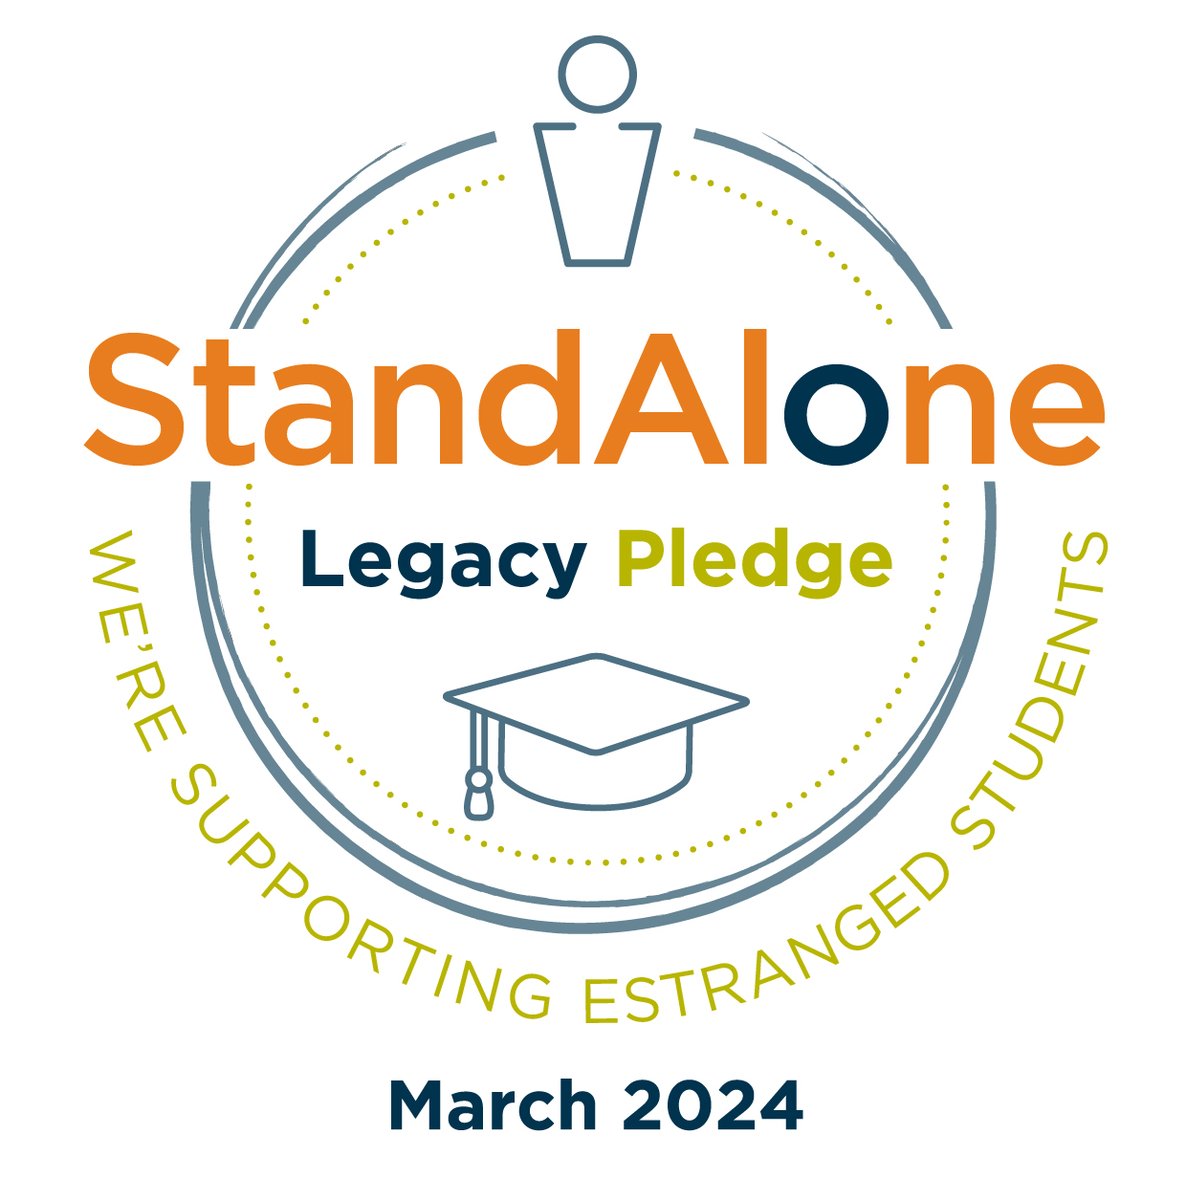 SCAPP are proud to join the @StandAloneHE #eslegacypledge. 
SCAPP commits to continue supporting our Widening Access and Widening Participation colleagues, who in turn support #estrangedstudents in their own organisations and institutions.